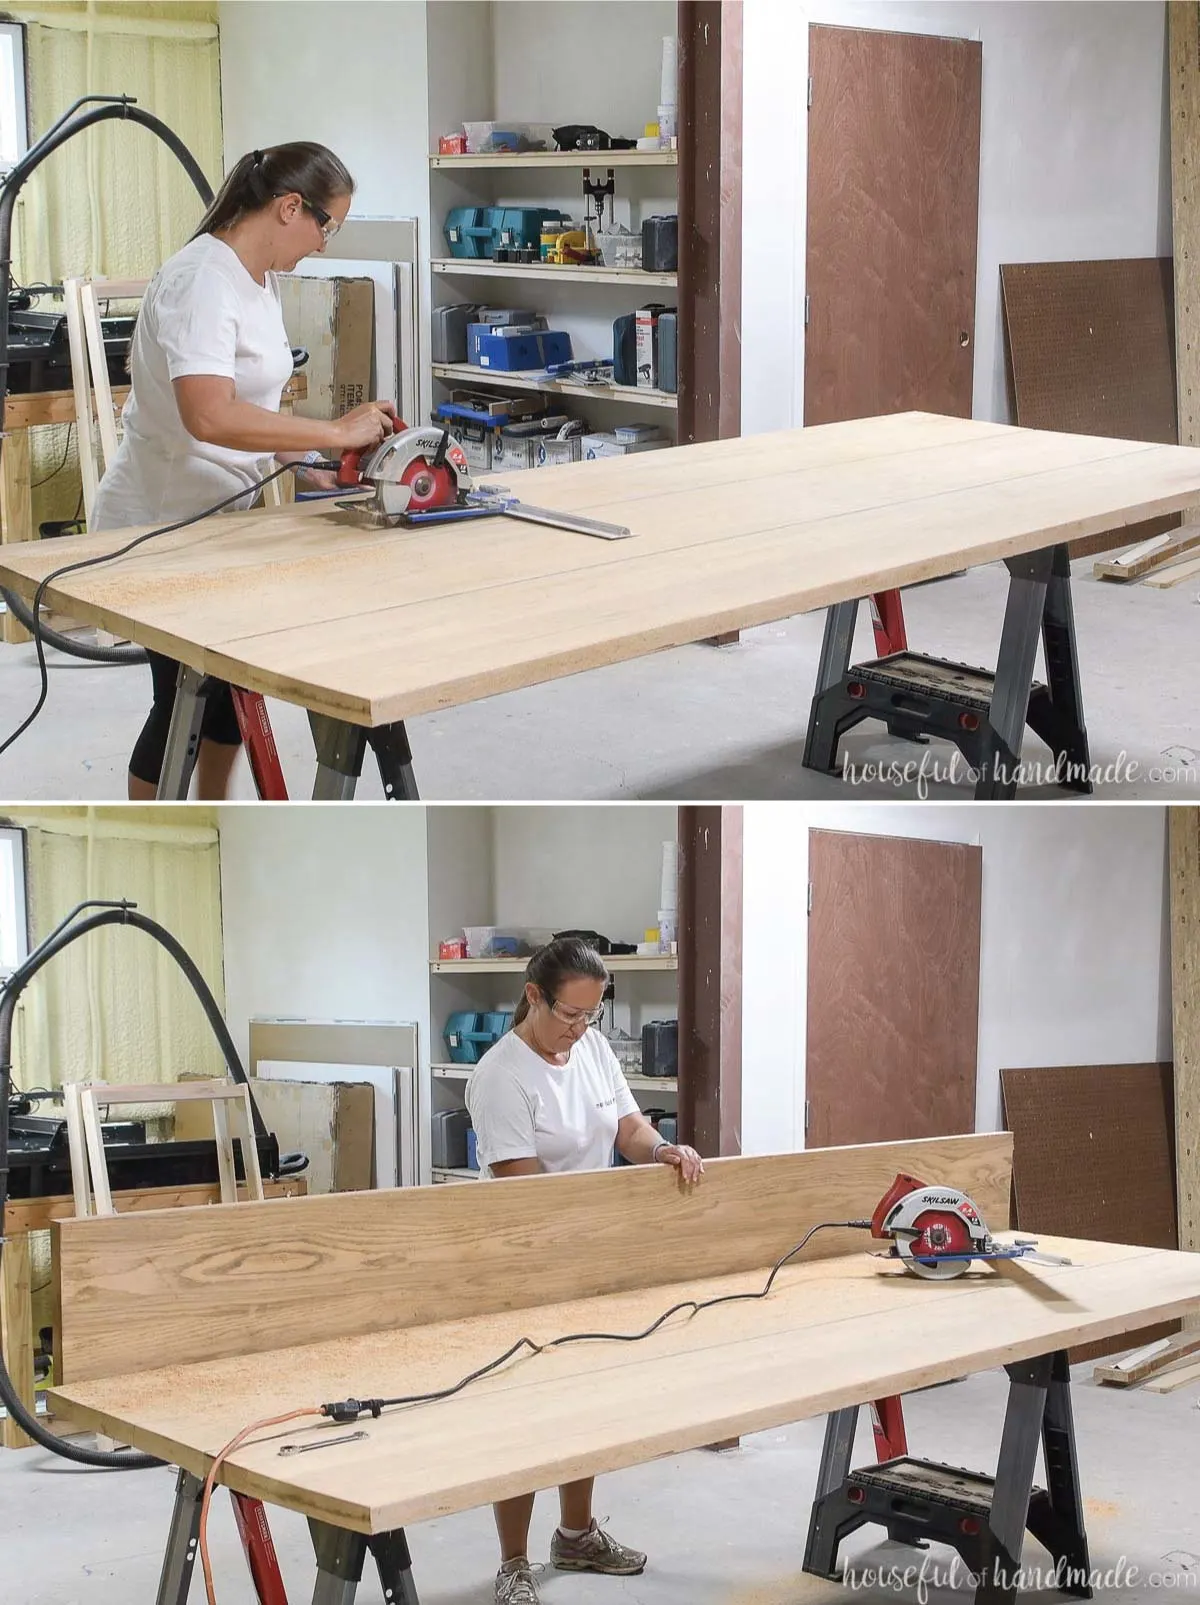 Two pictures showing cutting the table top into 12" sections with a circular saw. 